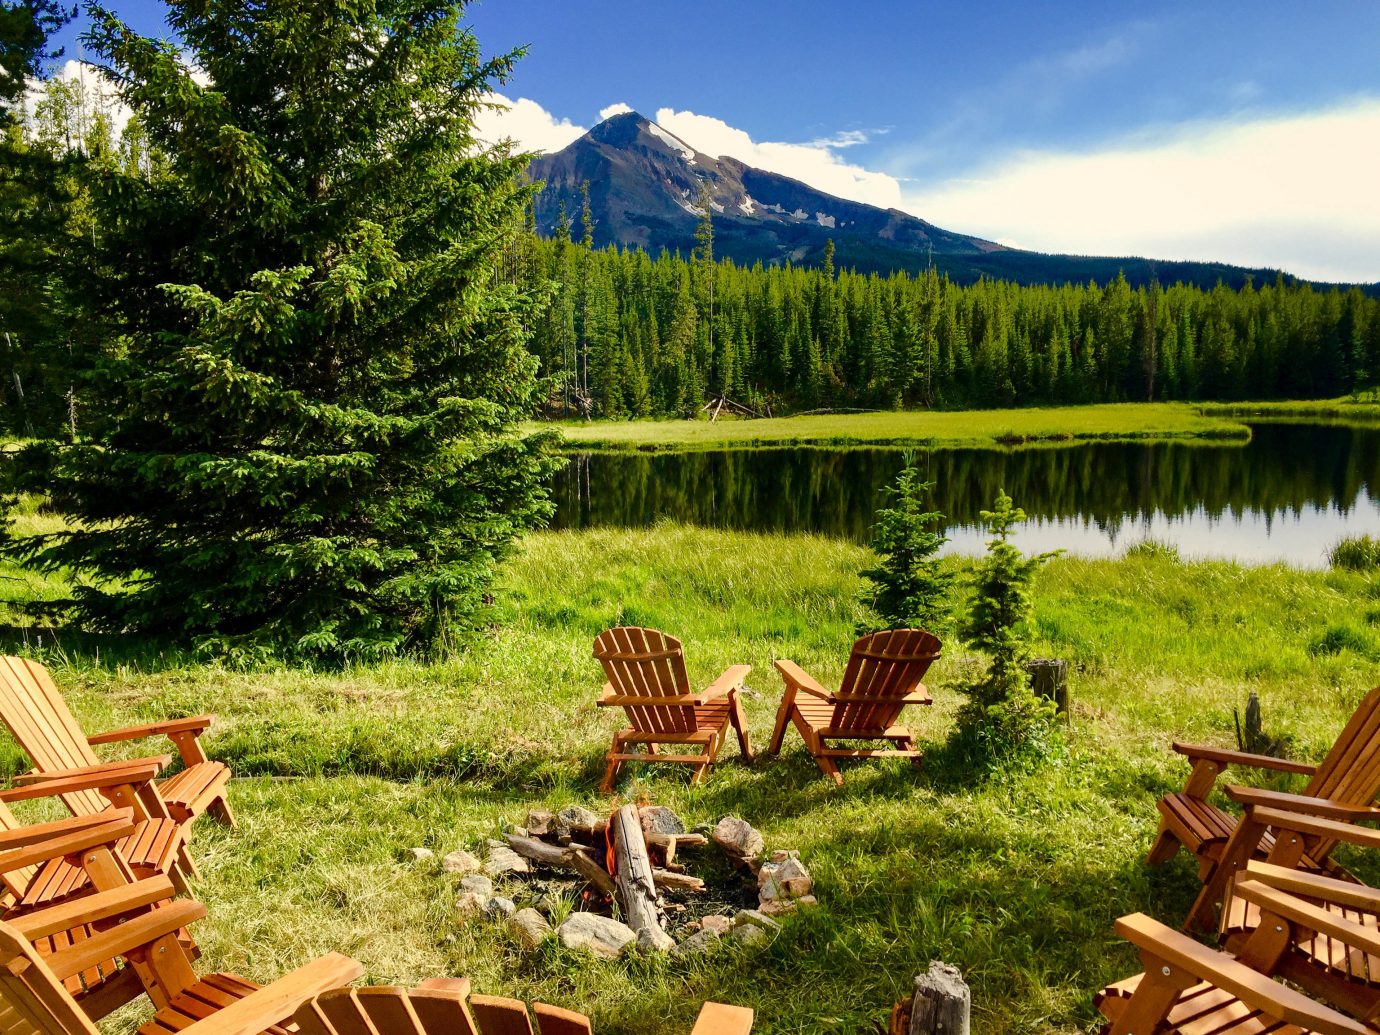 Glamping Hotels Montana Outdoors + Adventure Trip Ideas Nature wilderness nature reserve ecosystem national park mountain Lake mount scenery biome landscape tree meadow grass mountain range log cabin